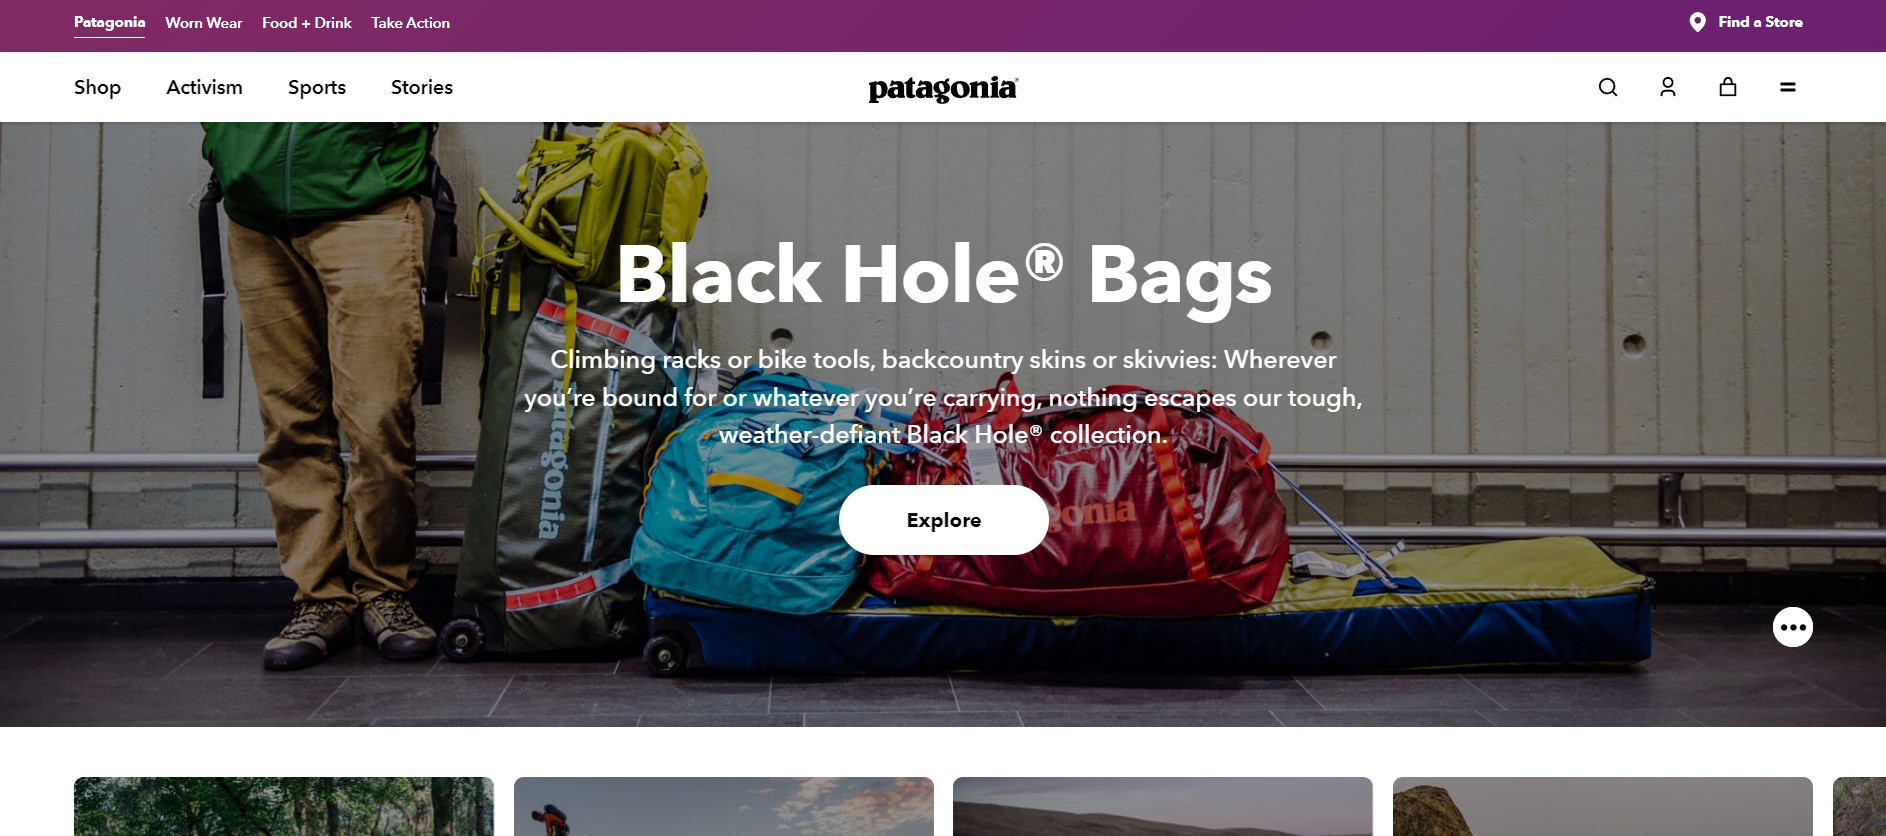 examples of brand personalities - patagonia